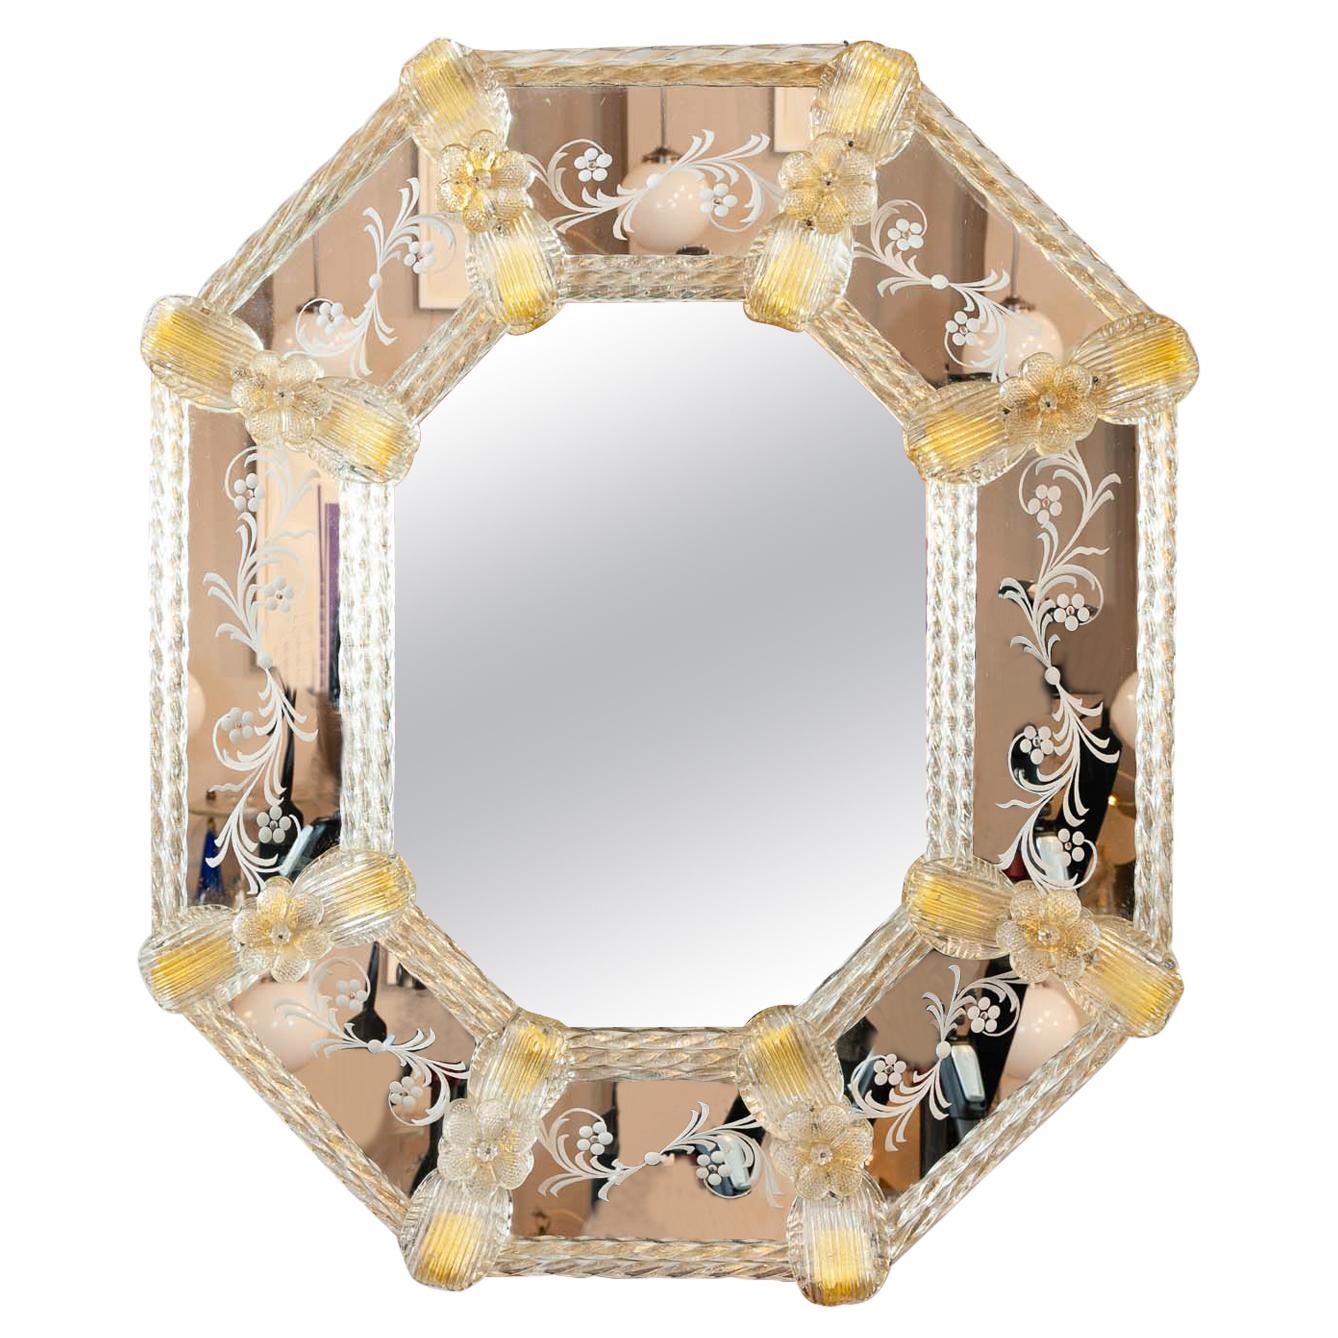 1960s Octagonal Italian Murano Venetian Floral Gold-Flecked Etched Wall Mirror